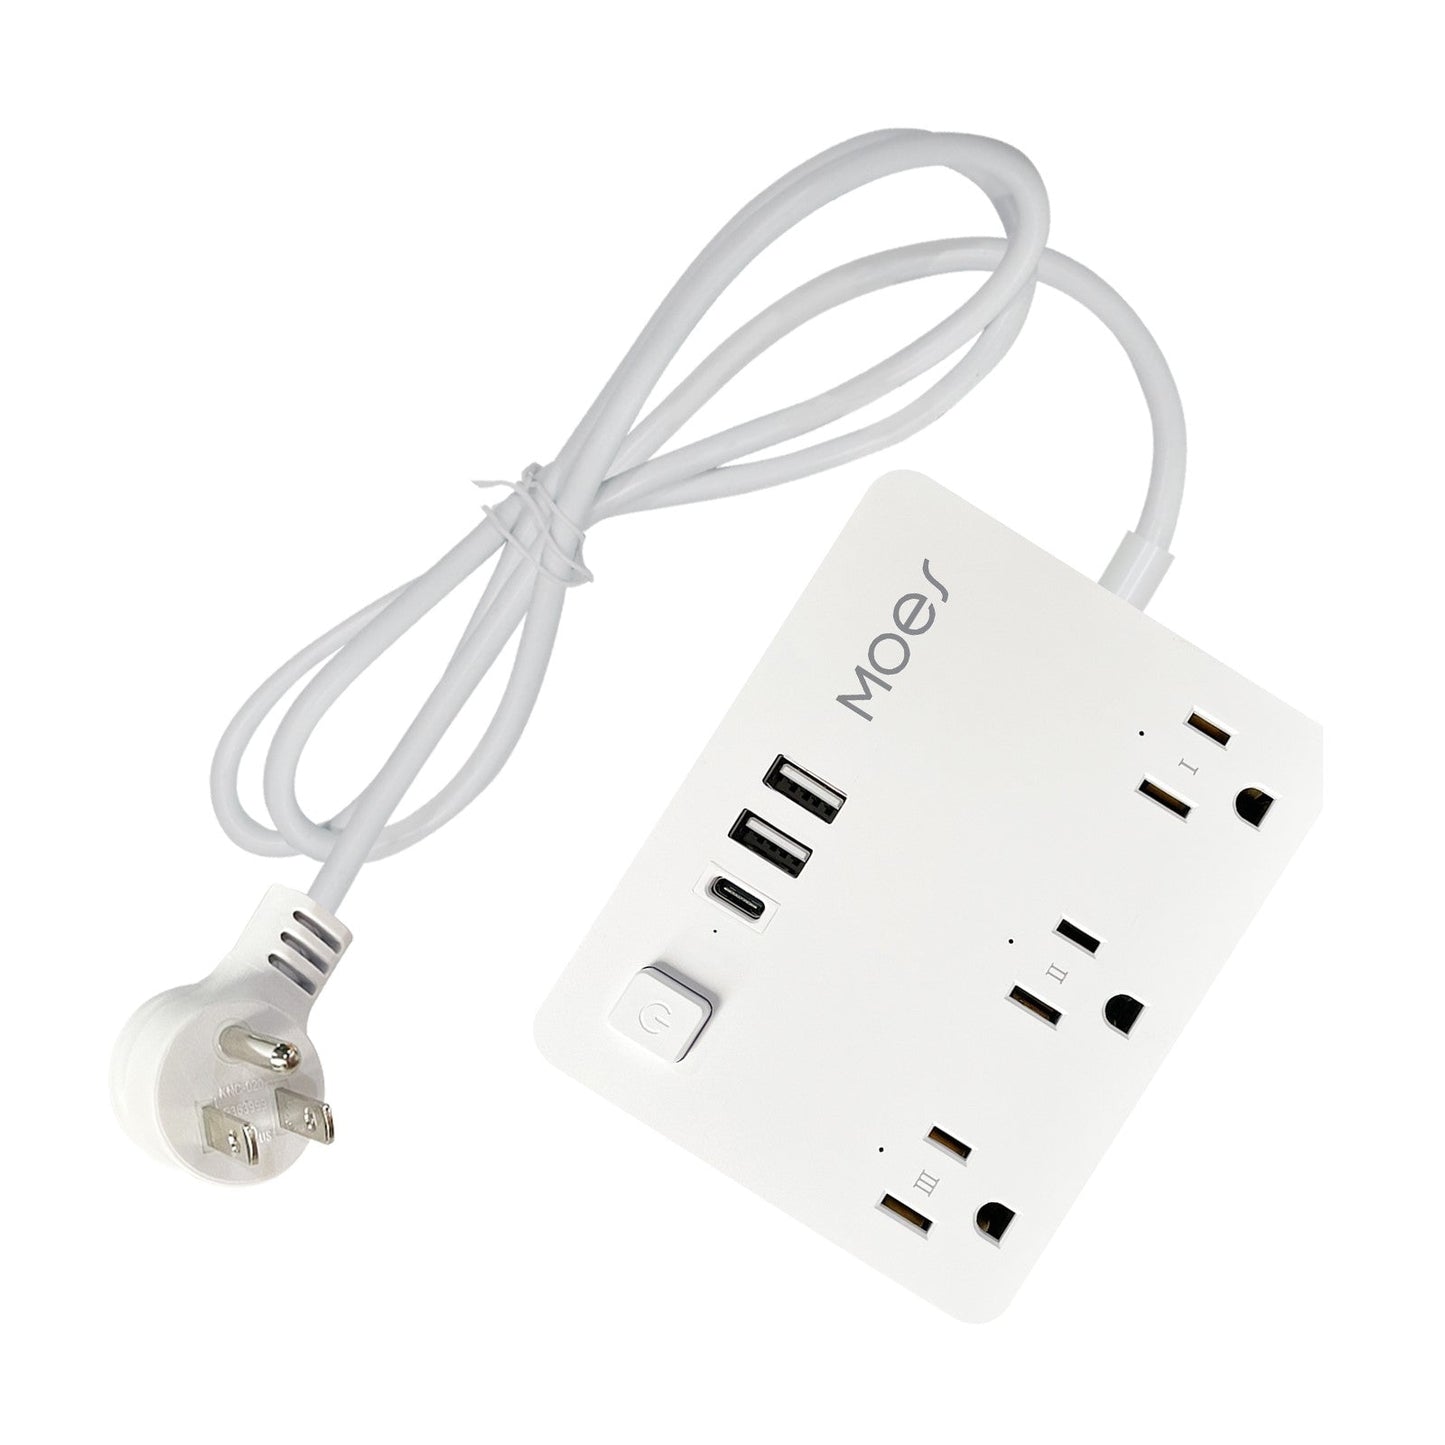 Smart Power Strip Surge |3 Outlets Power With USB Port – MOES